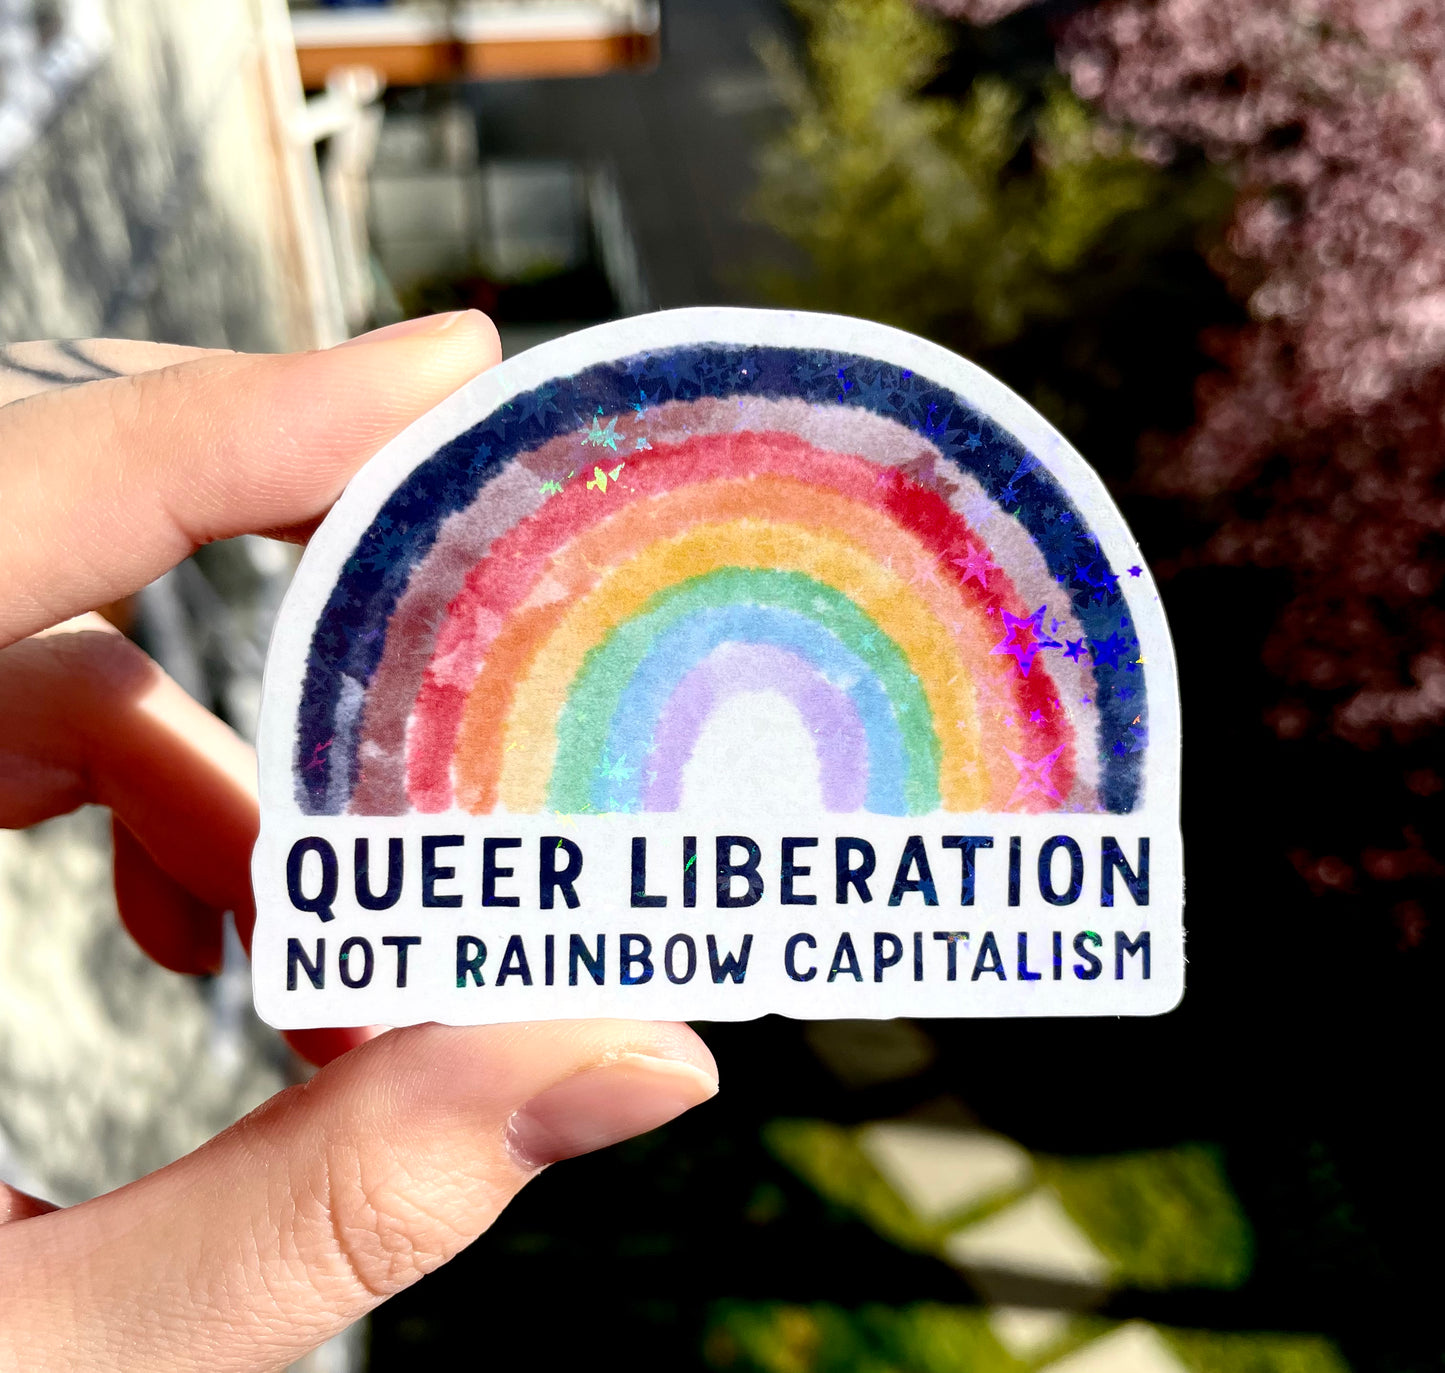 Queer liberation not rainbow capitalism